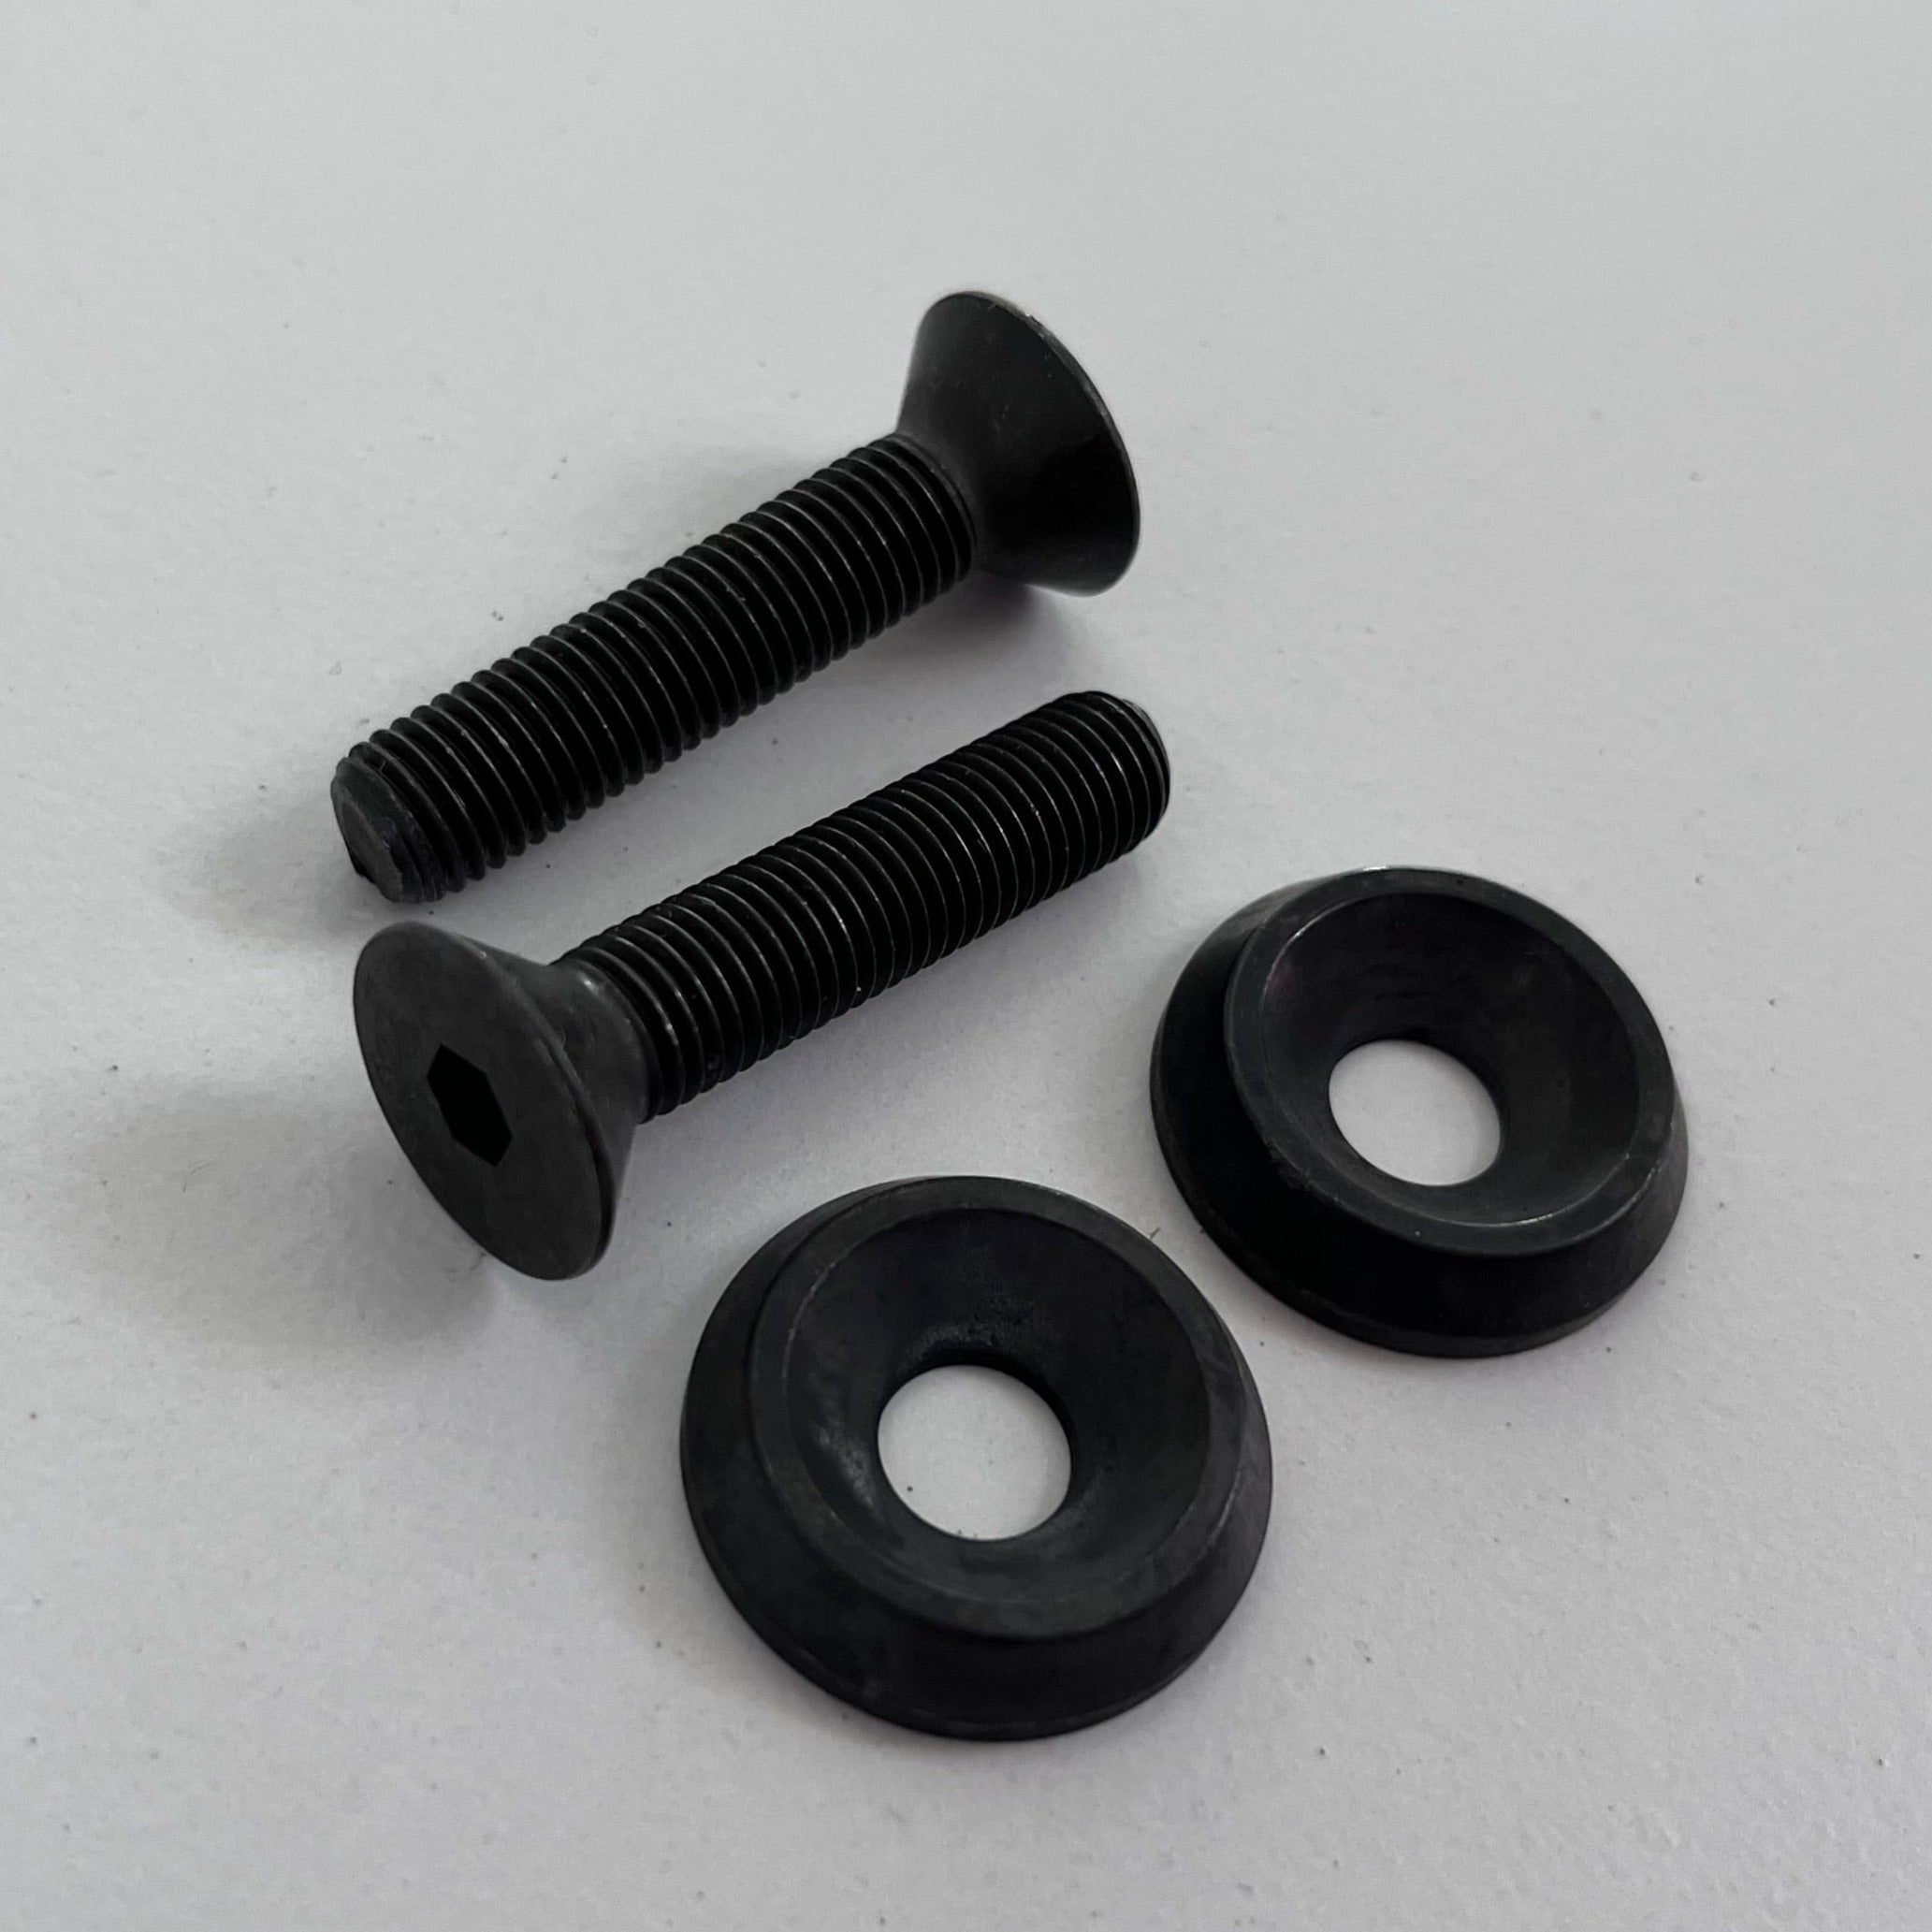 Spare Set of Atmos Retaining Screws and Washers